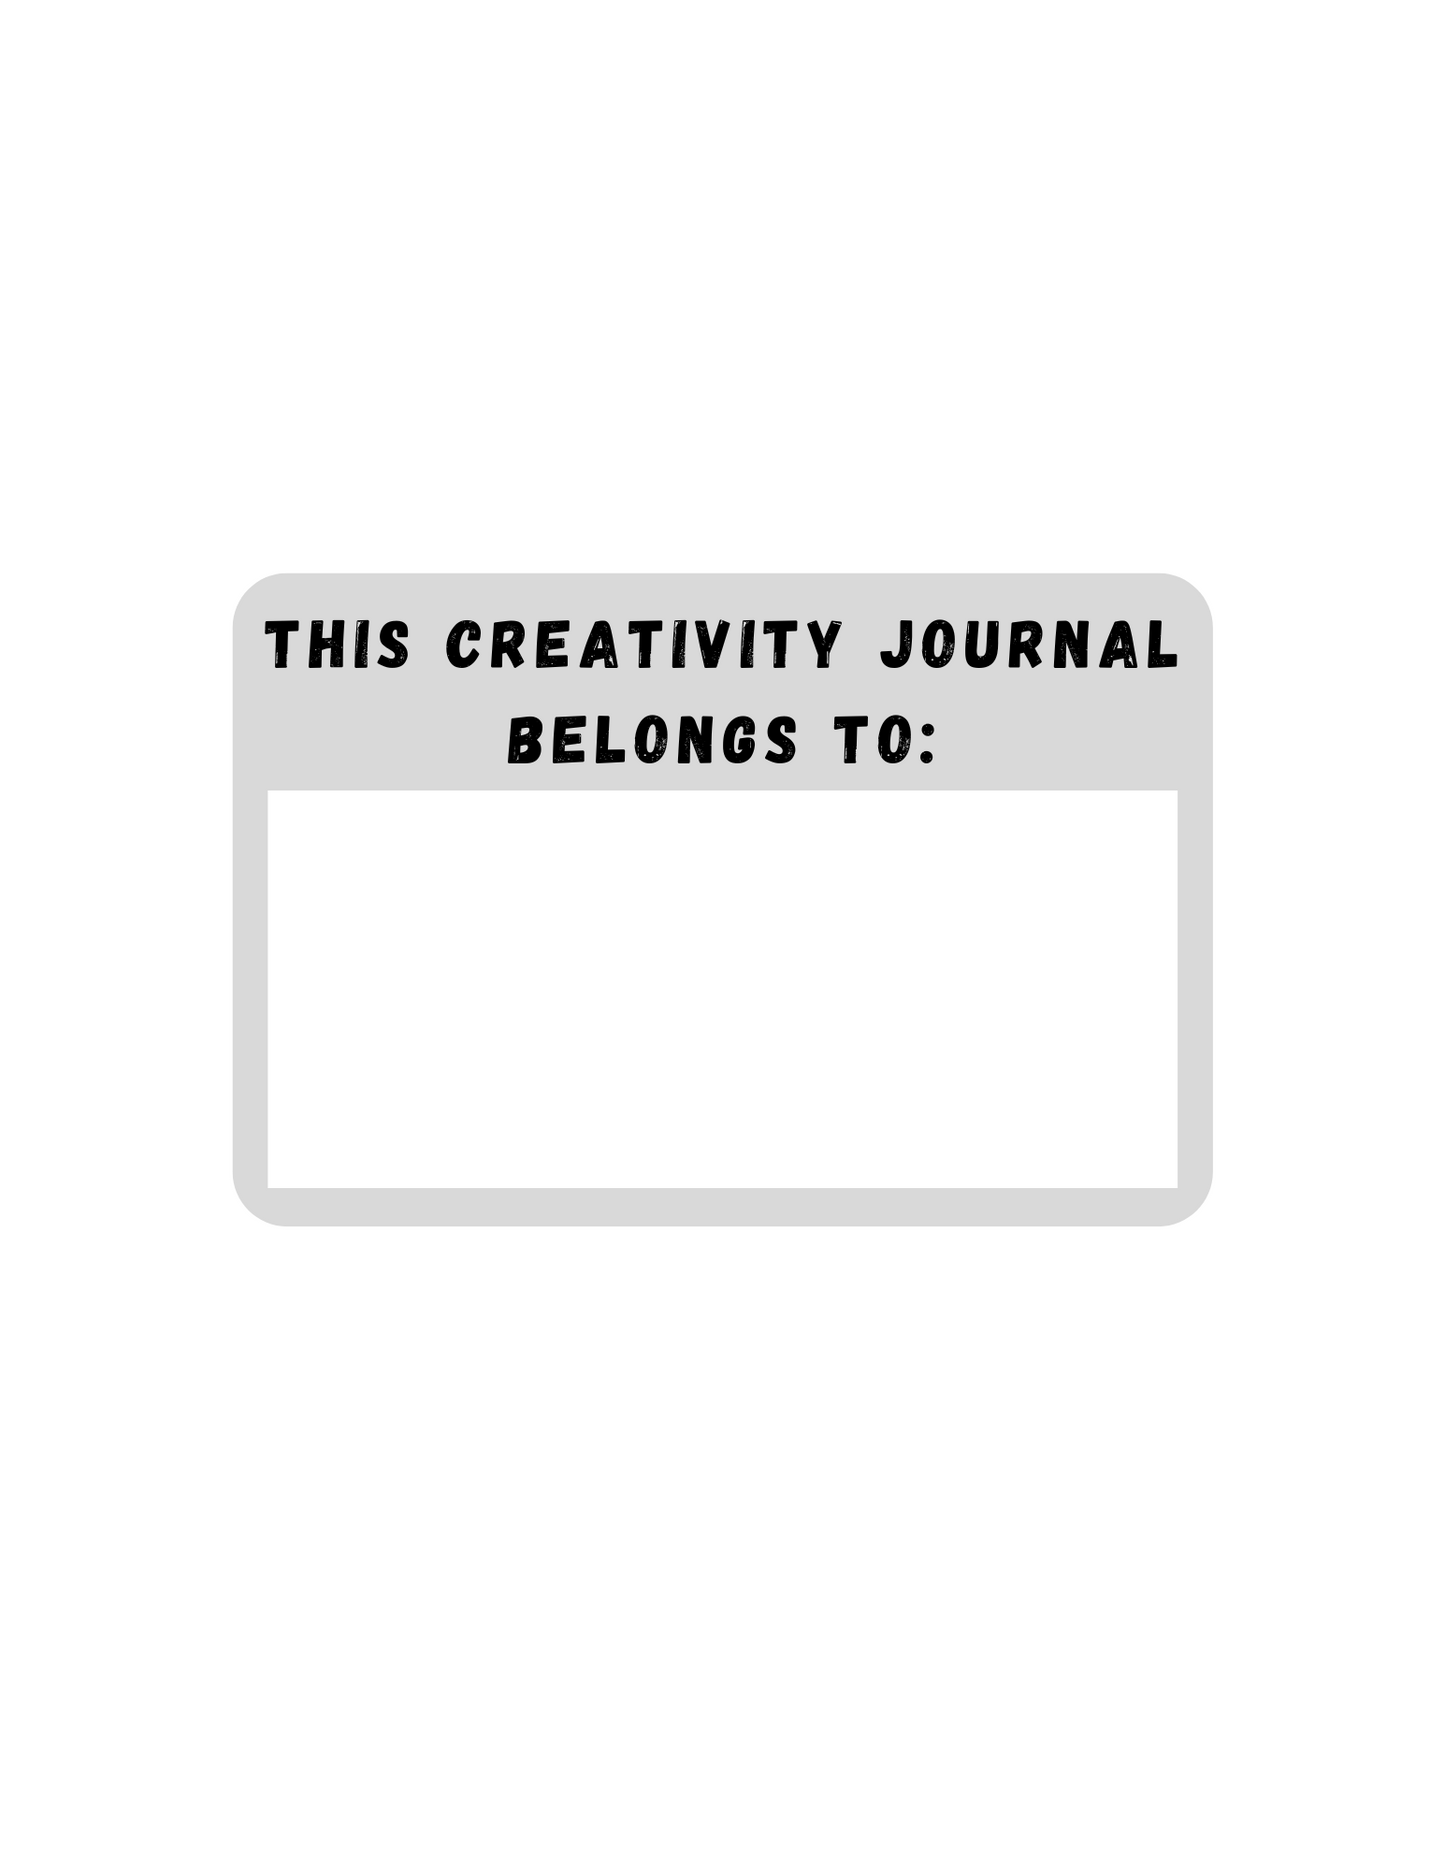 My Creativity Journal- Keep track of your creative inspirations!